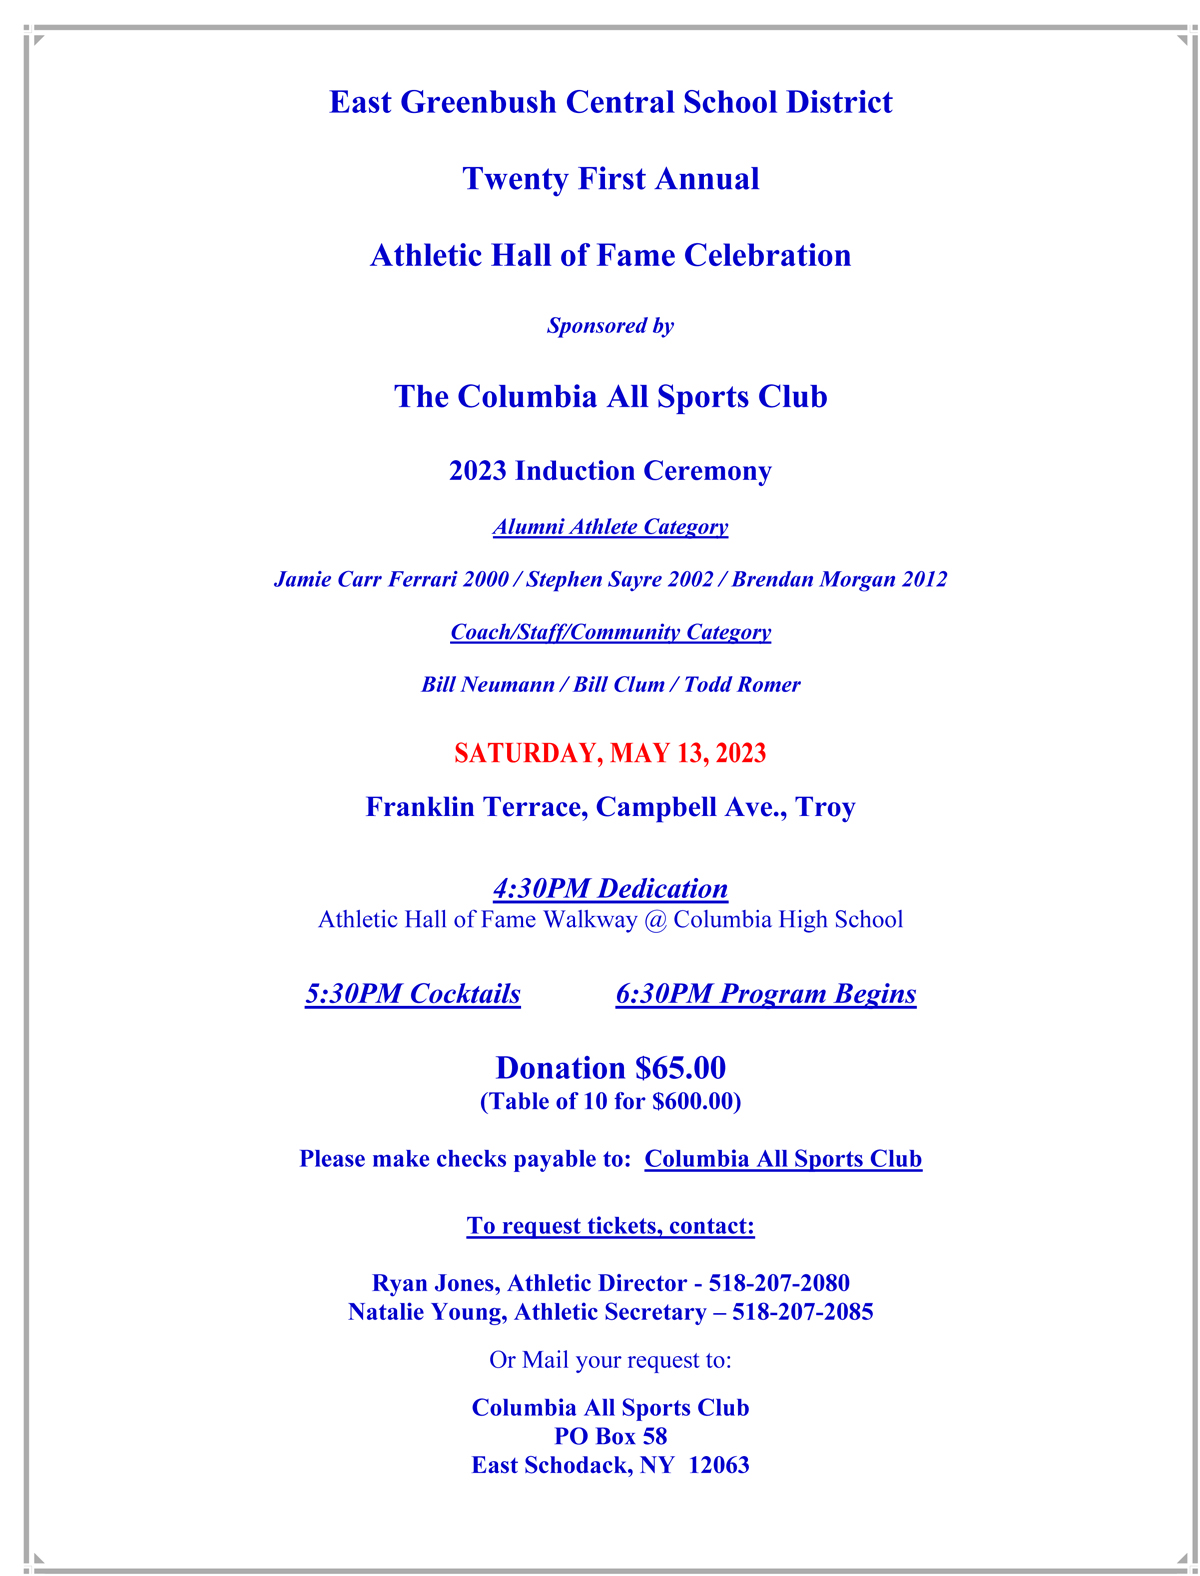 Athletic Hall of Fame Celebration Flyer Class of 2023